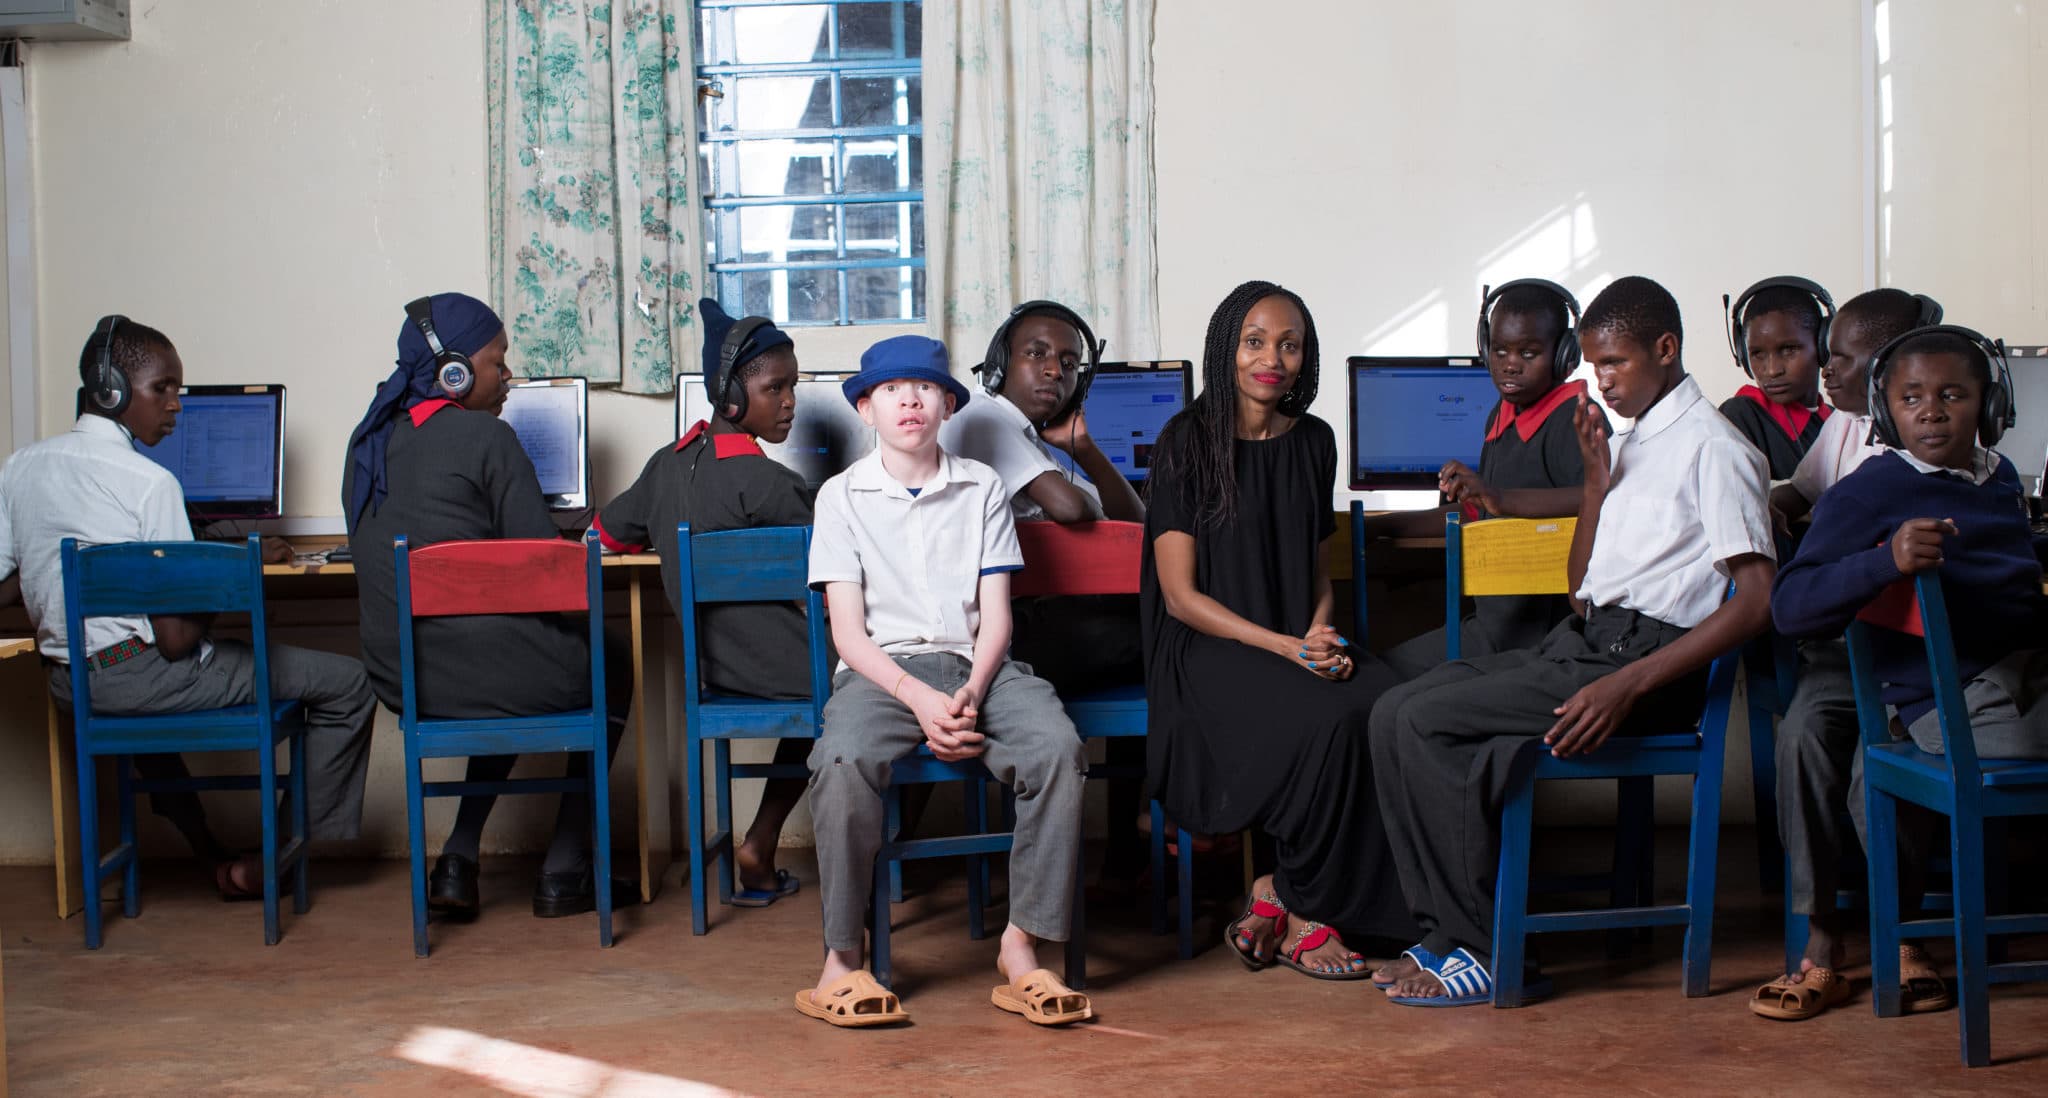 Kenya, inABLE schools for the blind and visually impaired students